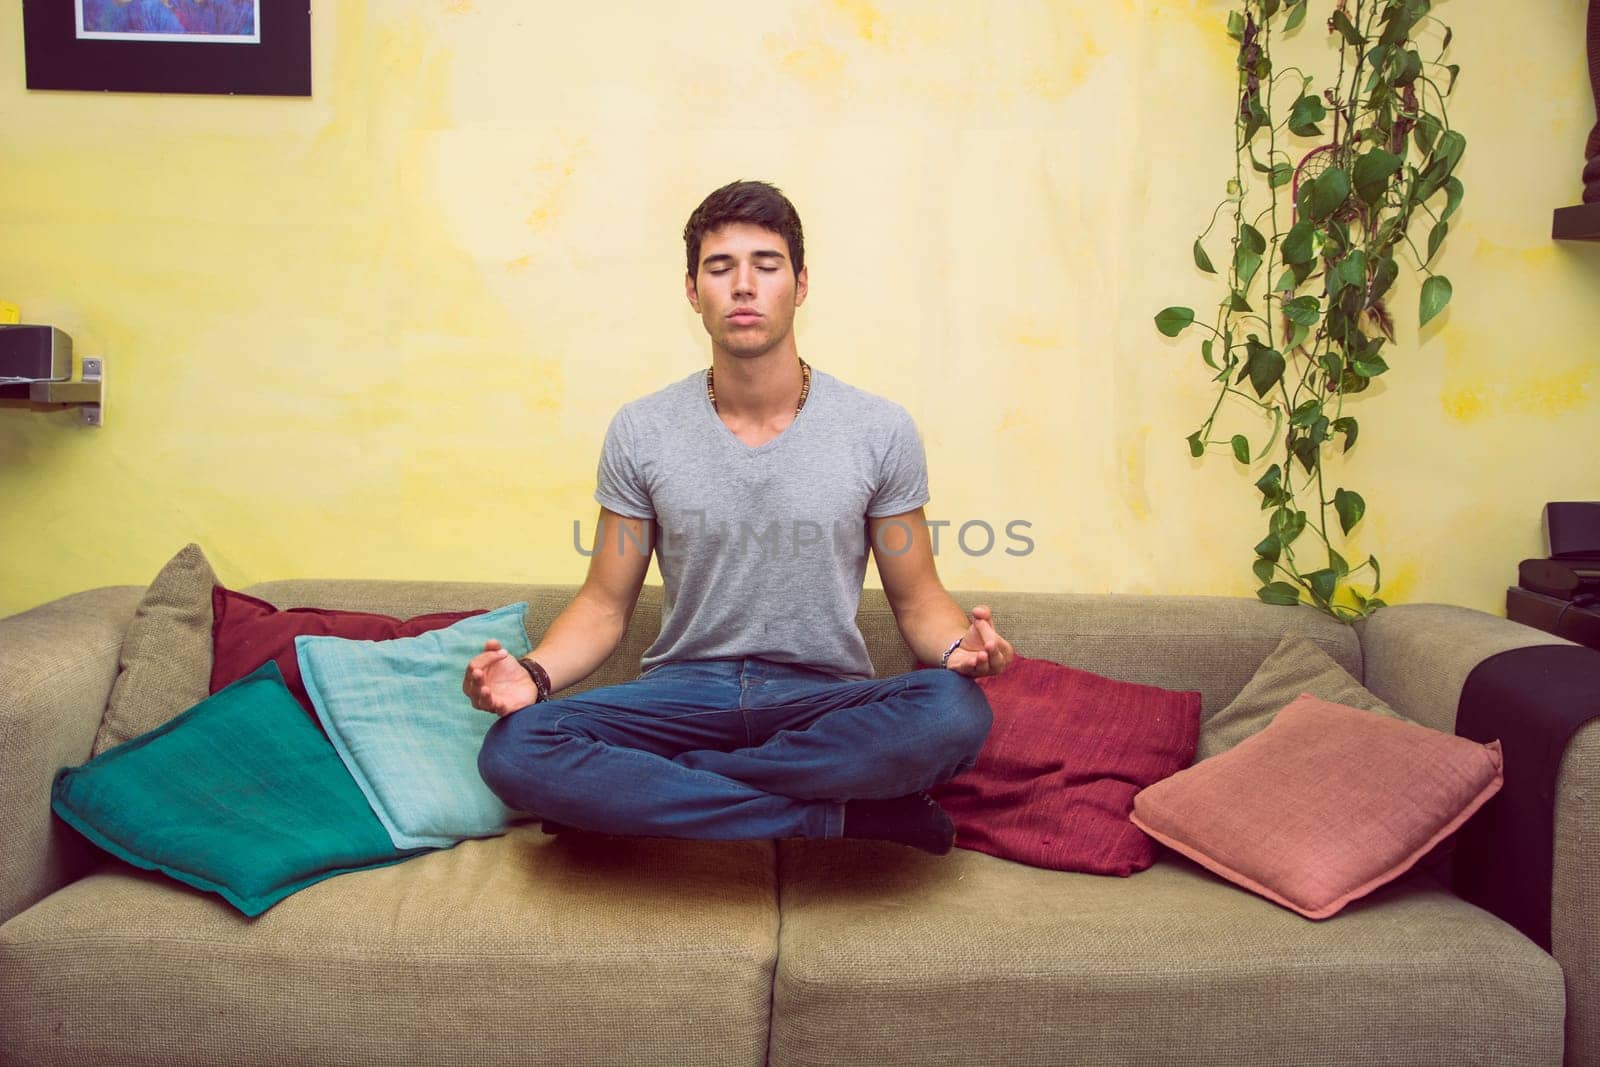 Photo of a man practicing yoga on a couch by artofphoto